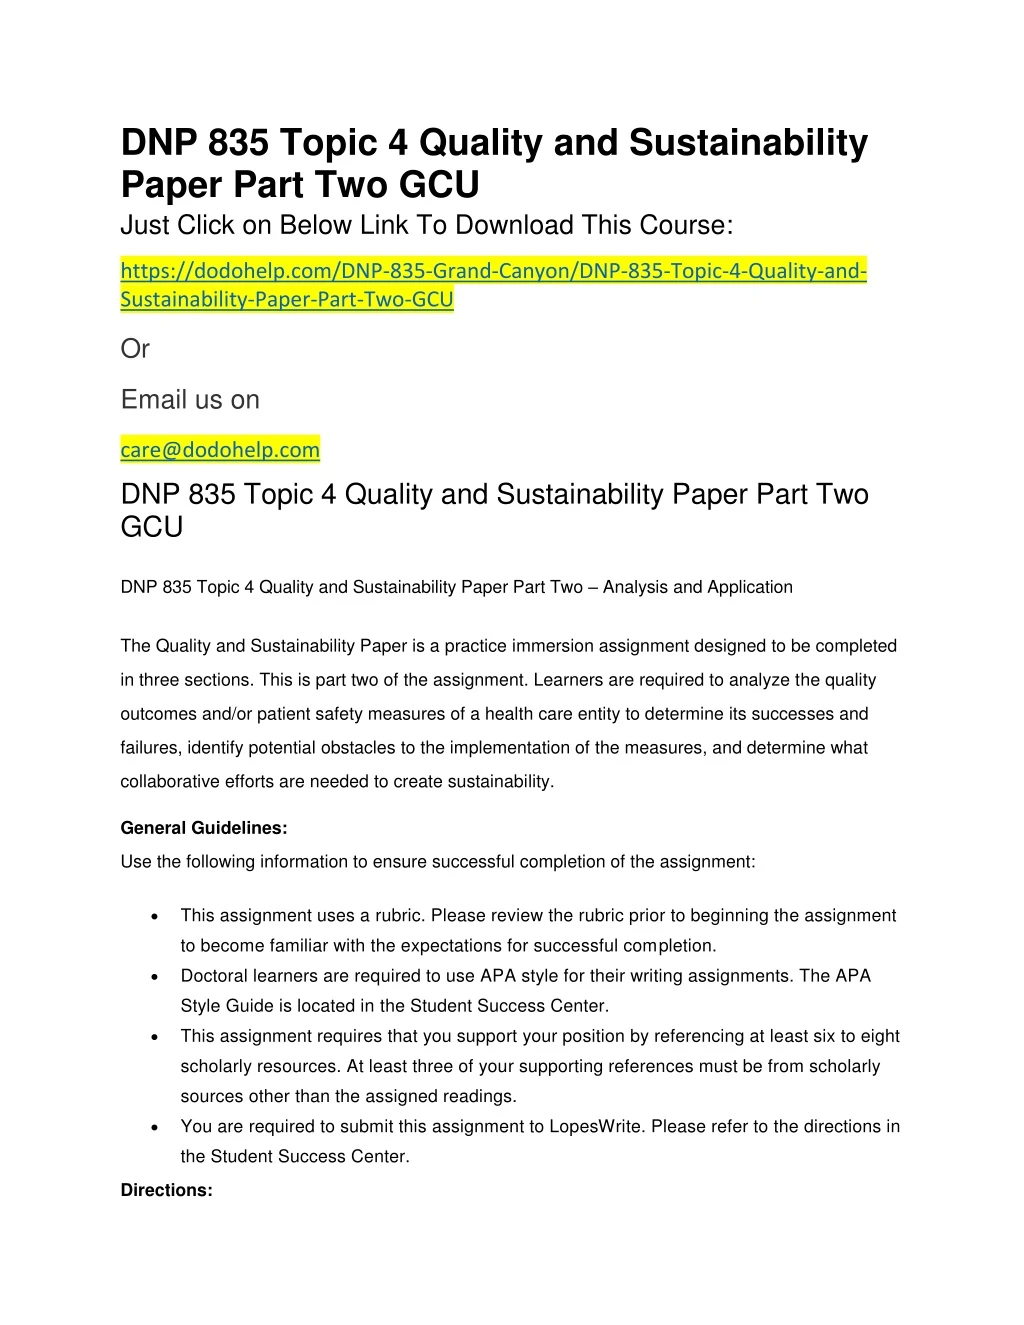 dnp 835 topic 4 quality and sustainability paper